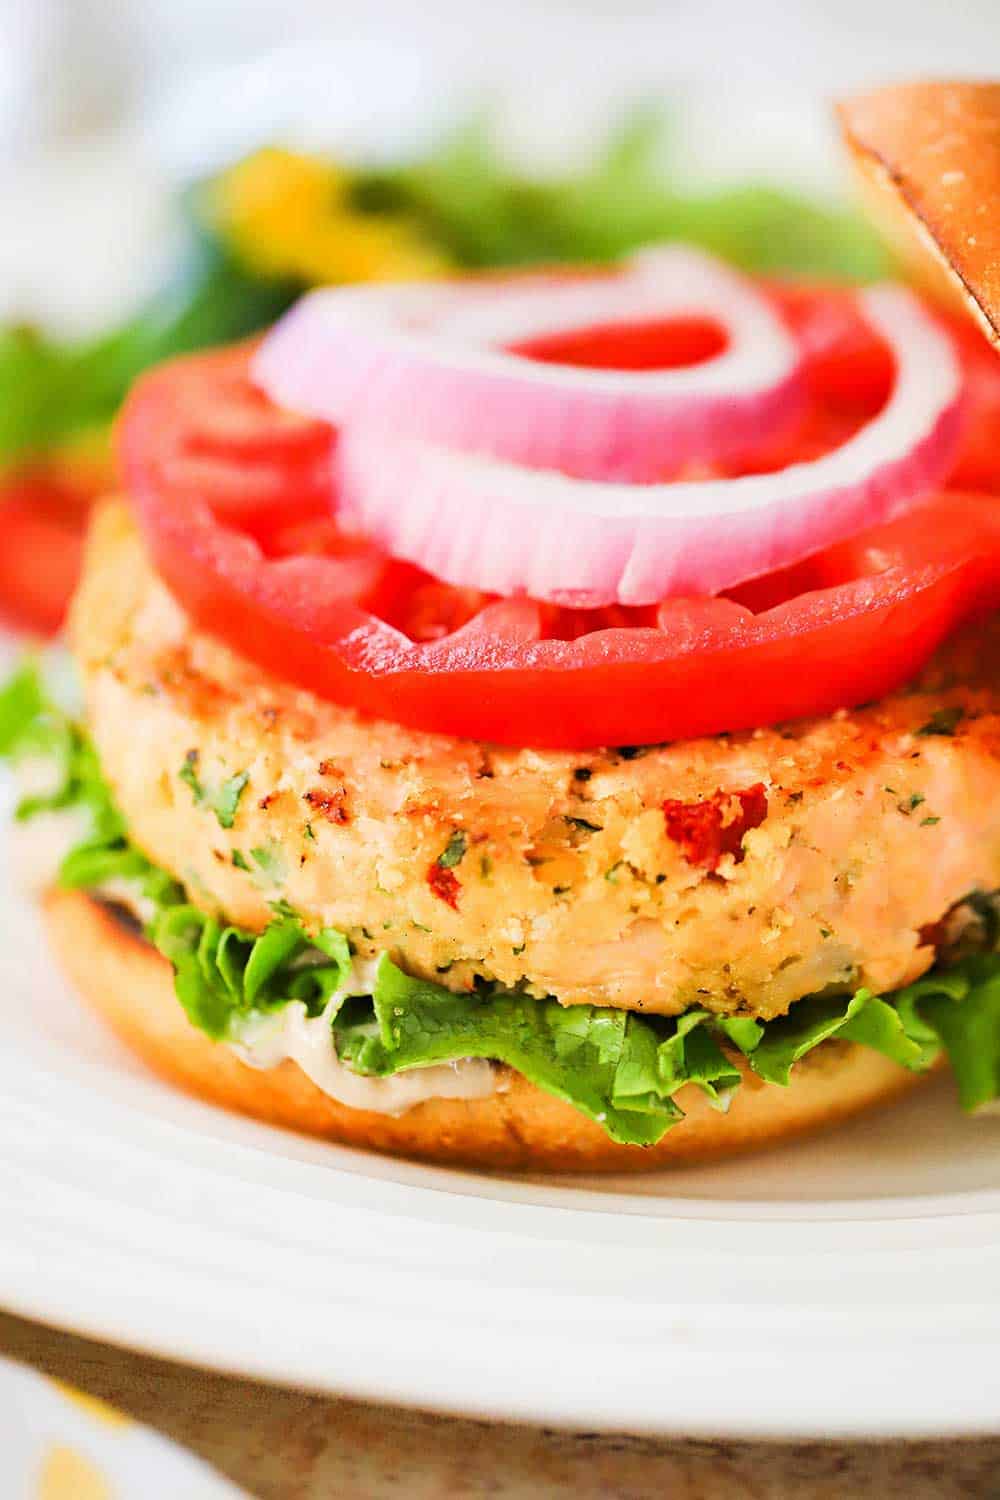 A fully cooked salmon burger on a hamburger bun, garnished with lettuce, tomato, and red onion all sitting on a white plate.